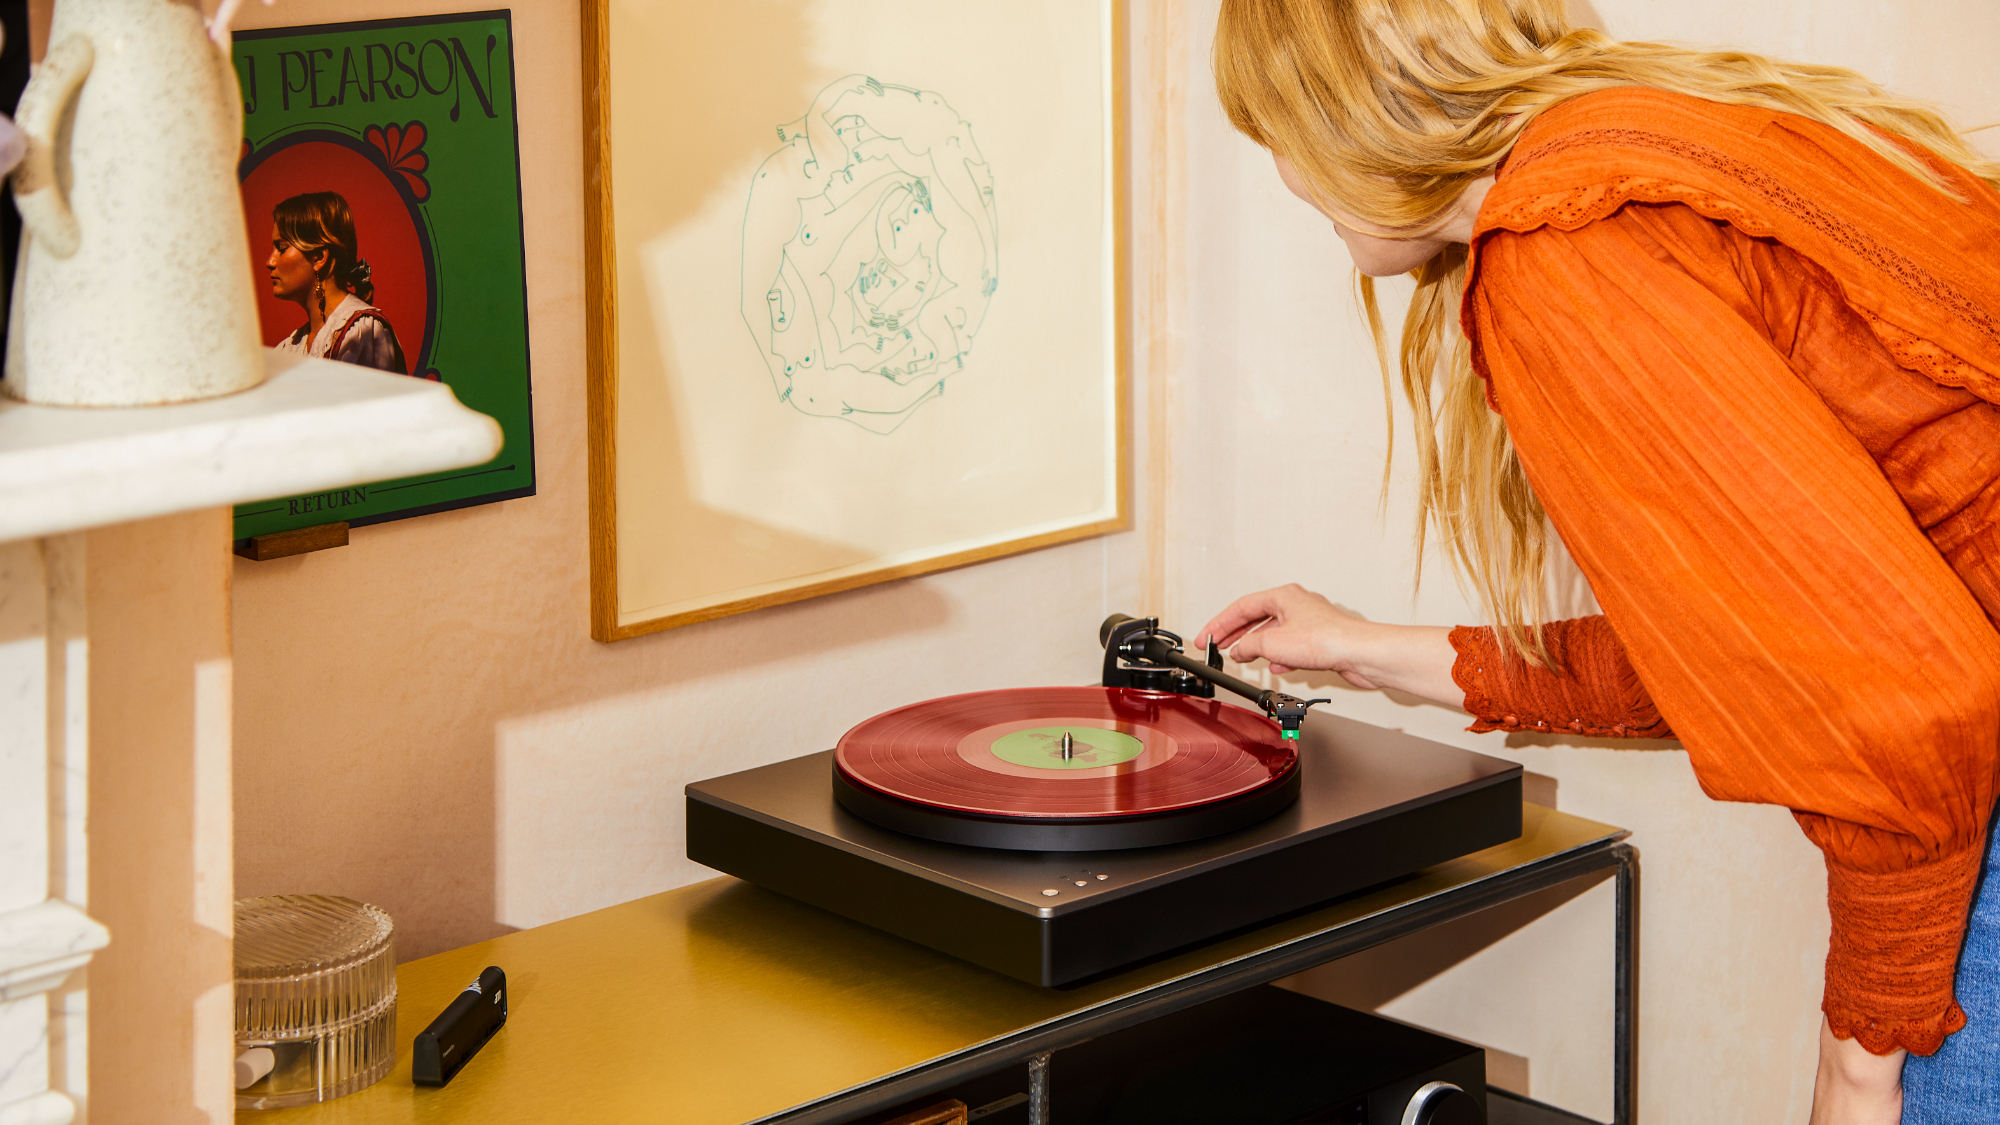 i would love to have a turntable system at home, but there are two things stopping me